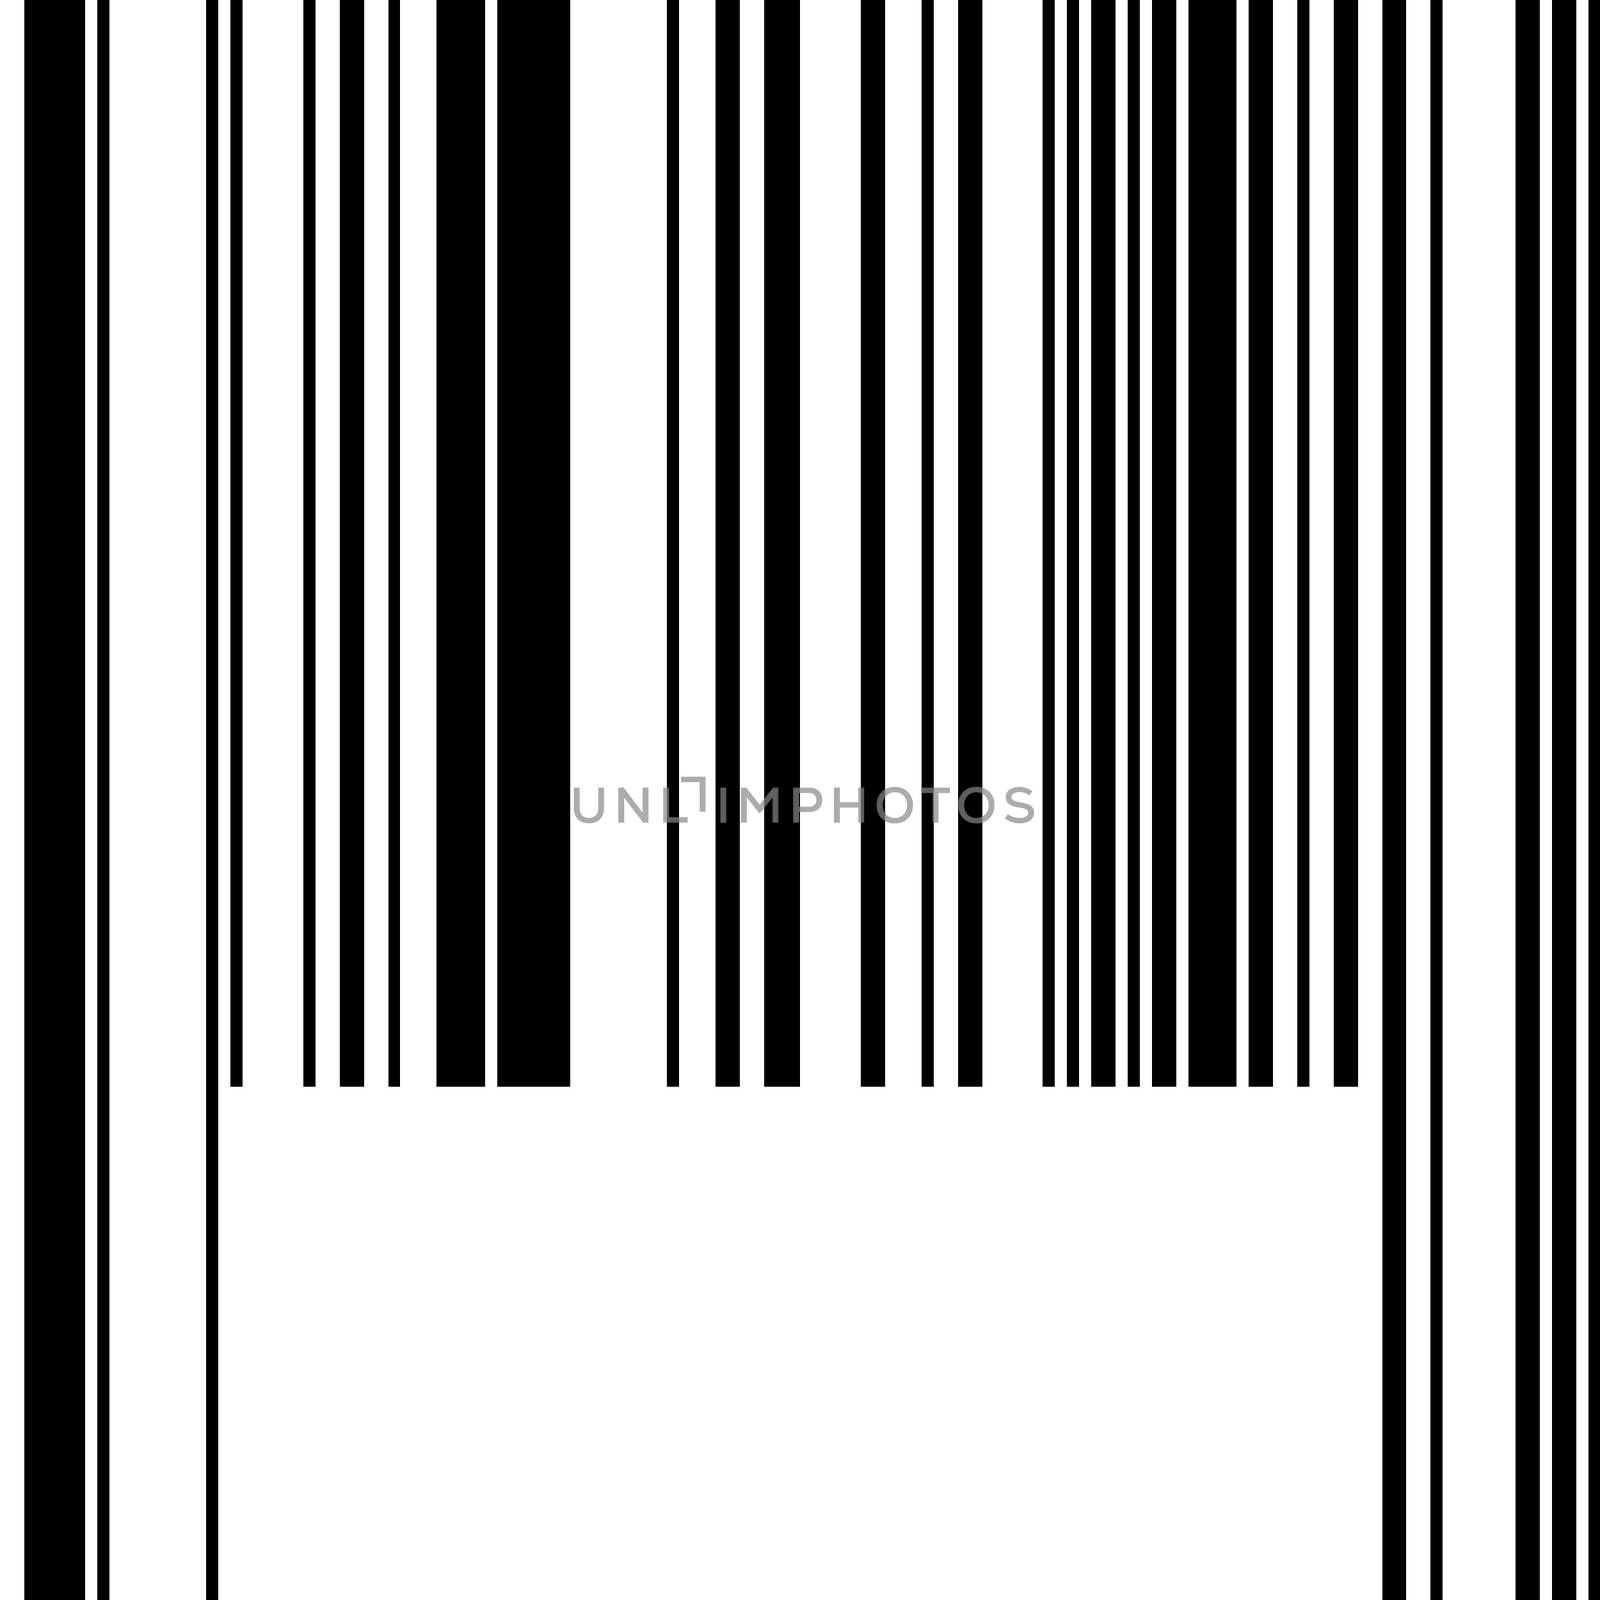 Barcode isolated in white